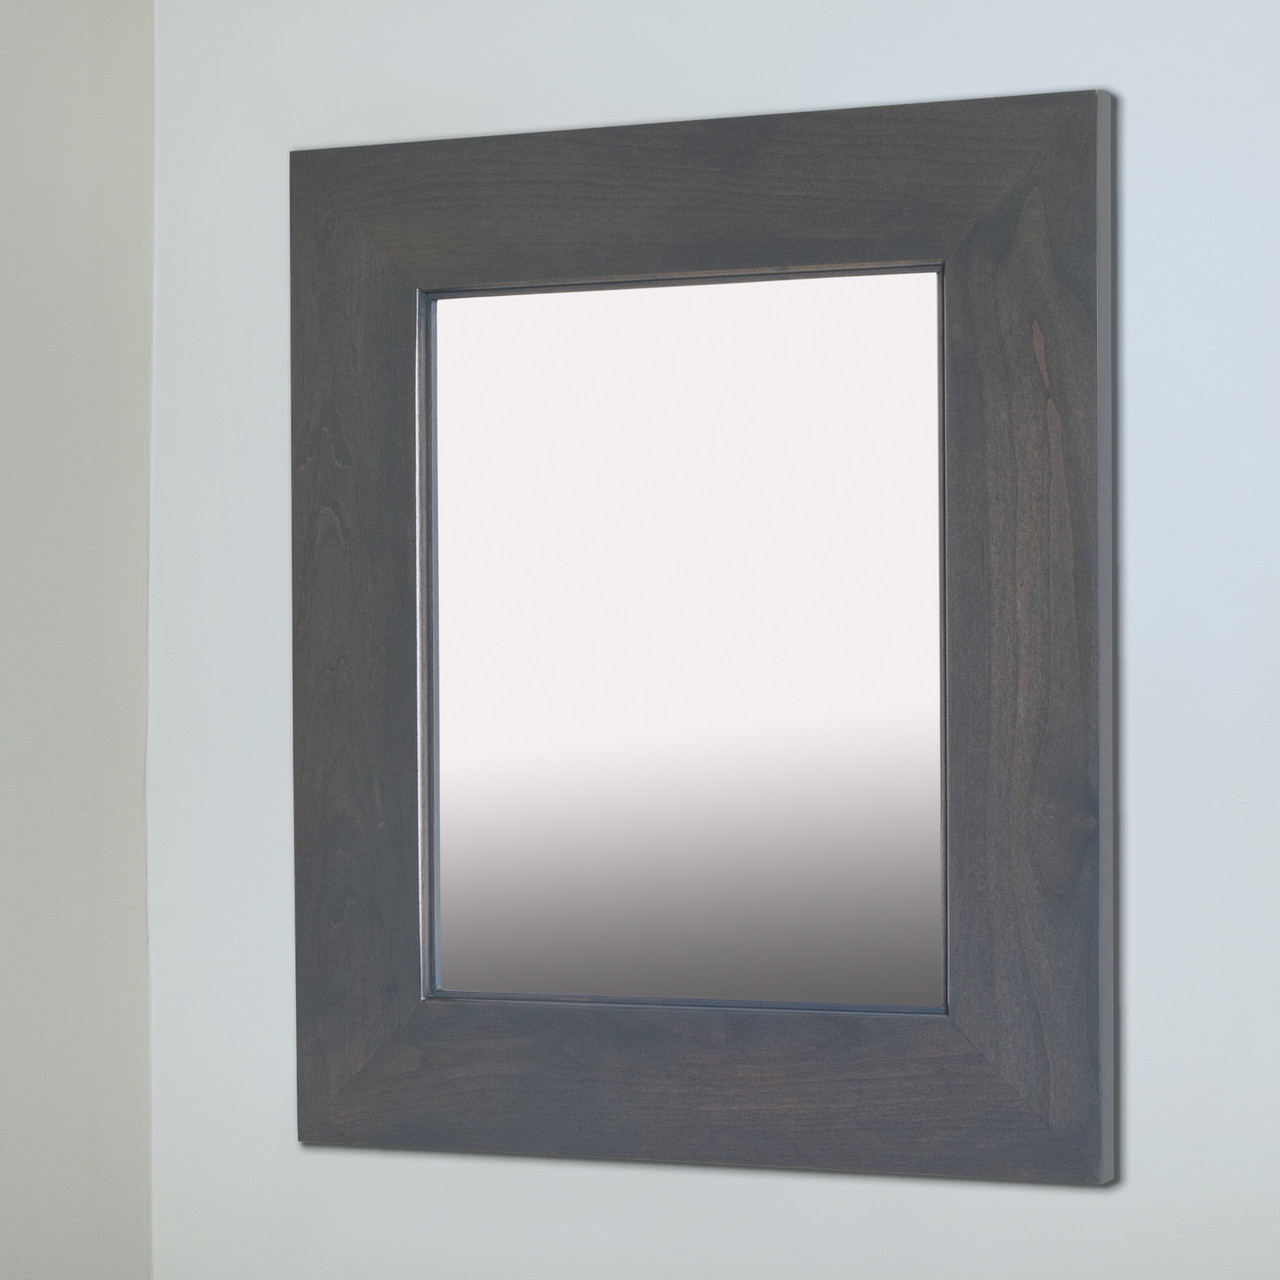 Regular White Concealed Cabinet Recessed In Wall Picture Frame